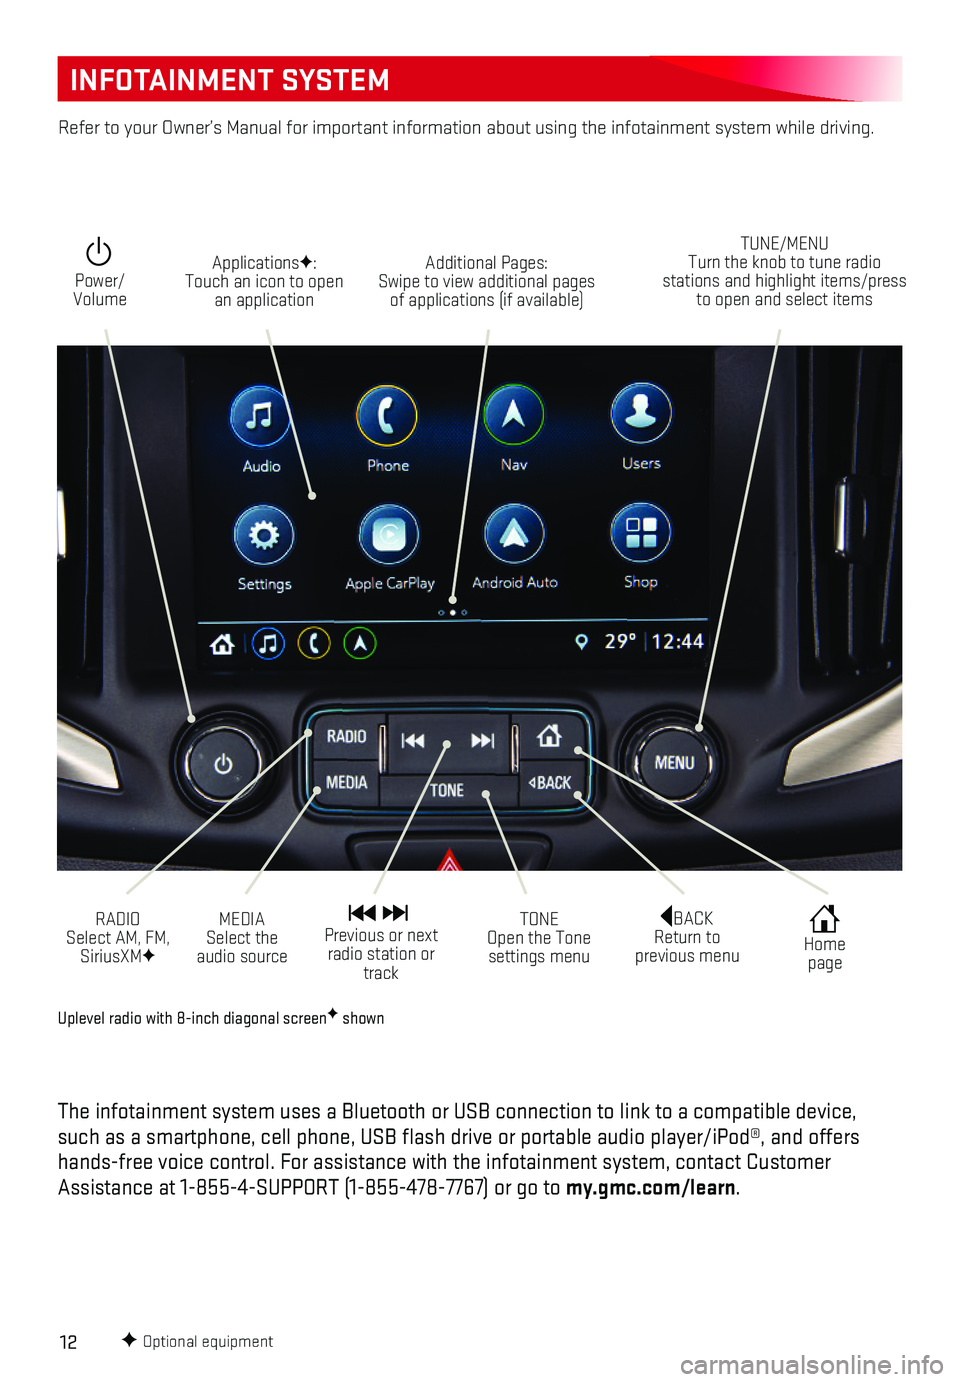 GMC TERRAIN 2018  Get To Know Guide 12
INFOTAINMENT SYSTEM
F Optional equipment
Uplevel radio with 8-inch diagonal screenF shown
The infotainment system uses a Bluetooth or USB connection to link to a \
compatible device, such as a smar